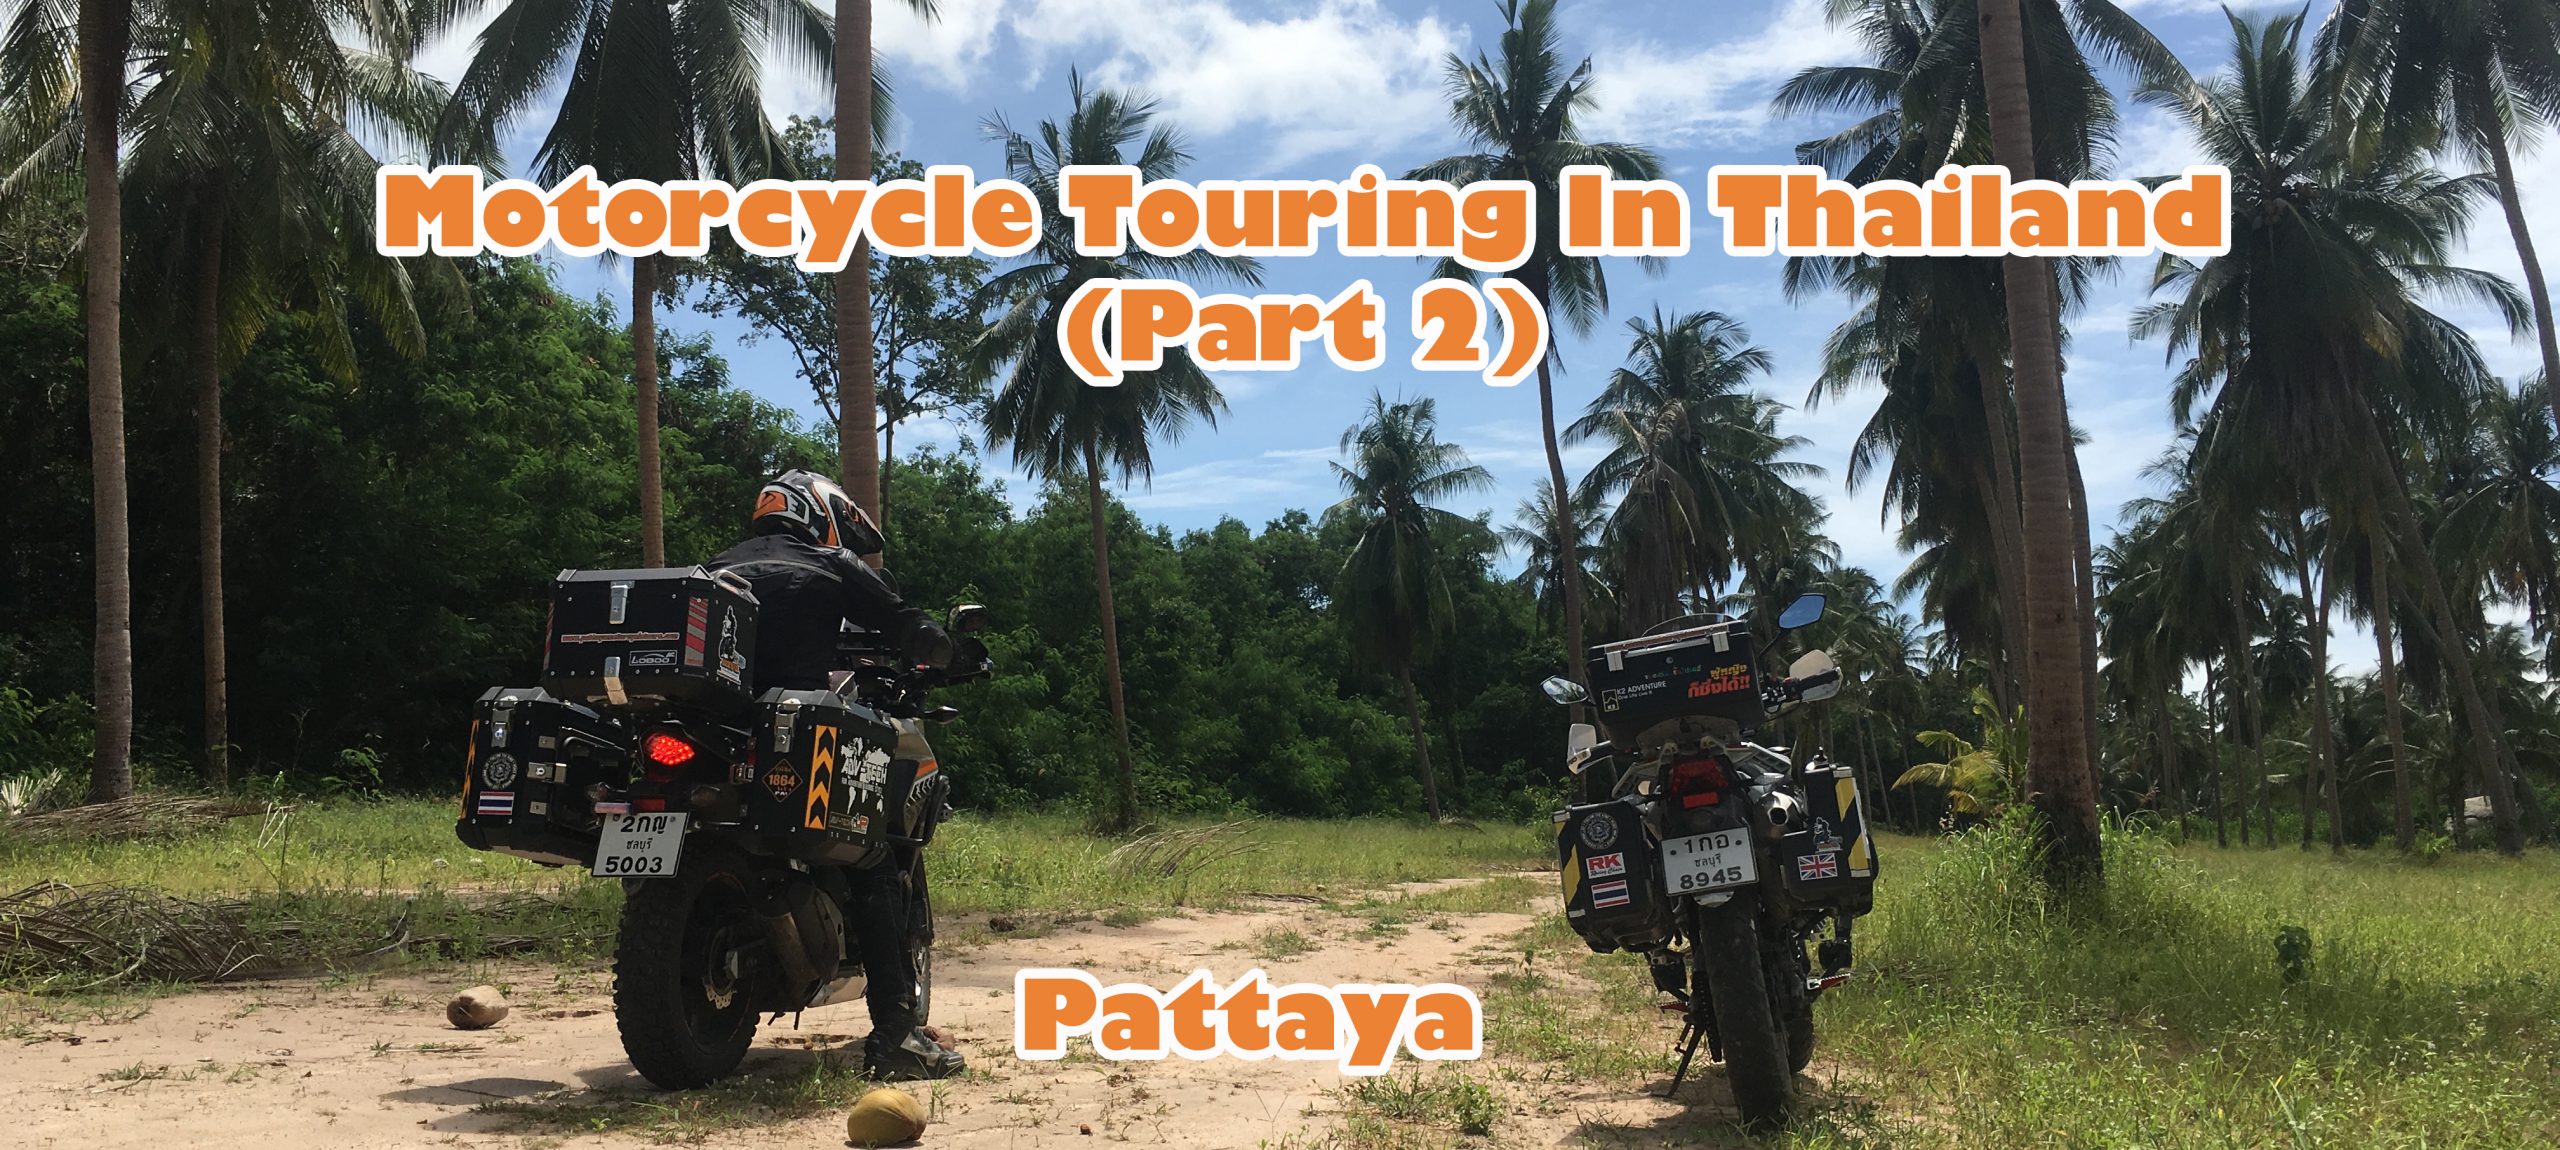 Motorcycle Touring In Thailand Part 2 Pattaya And intended for size 4032 X 1812